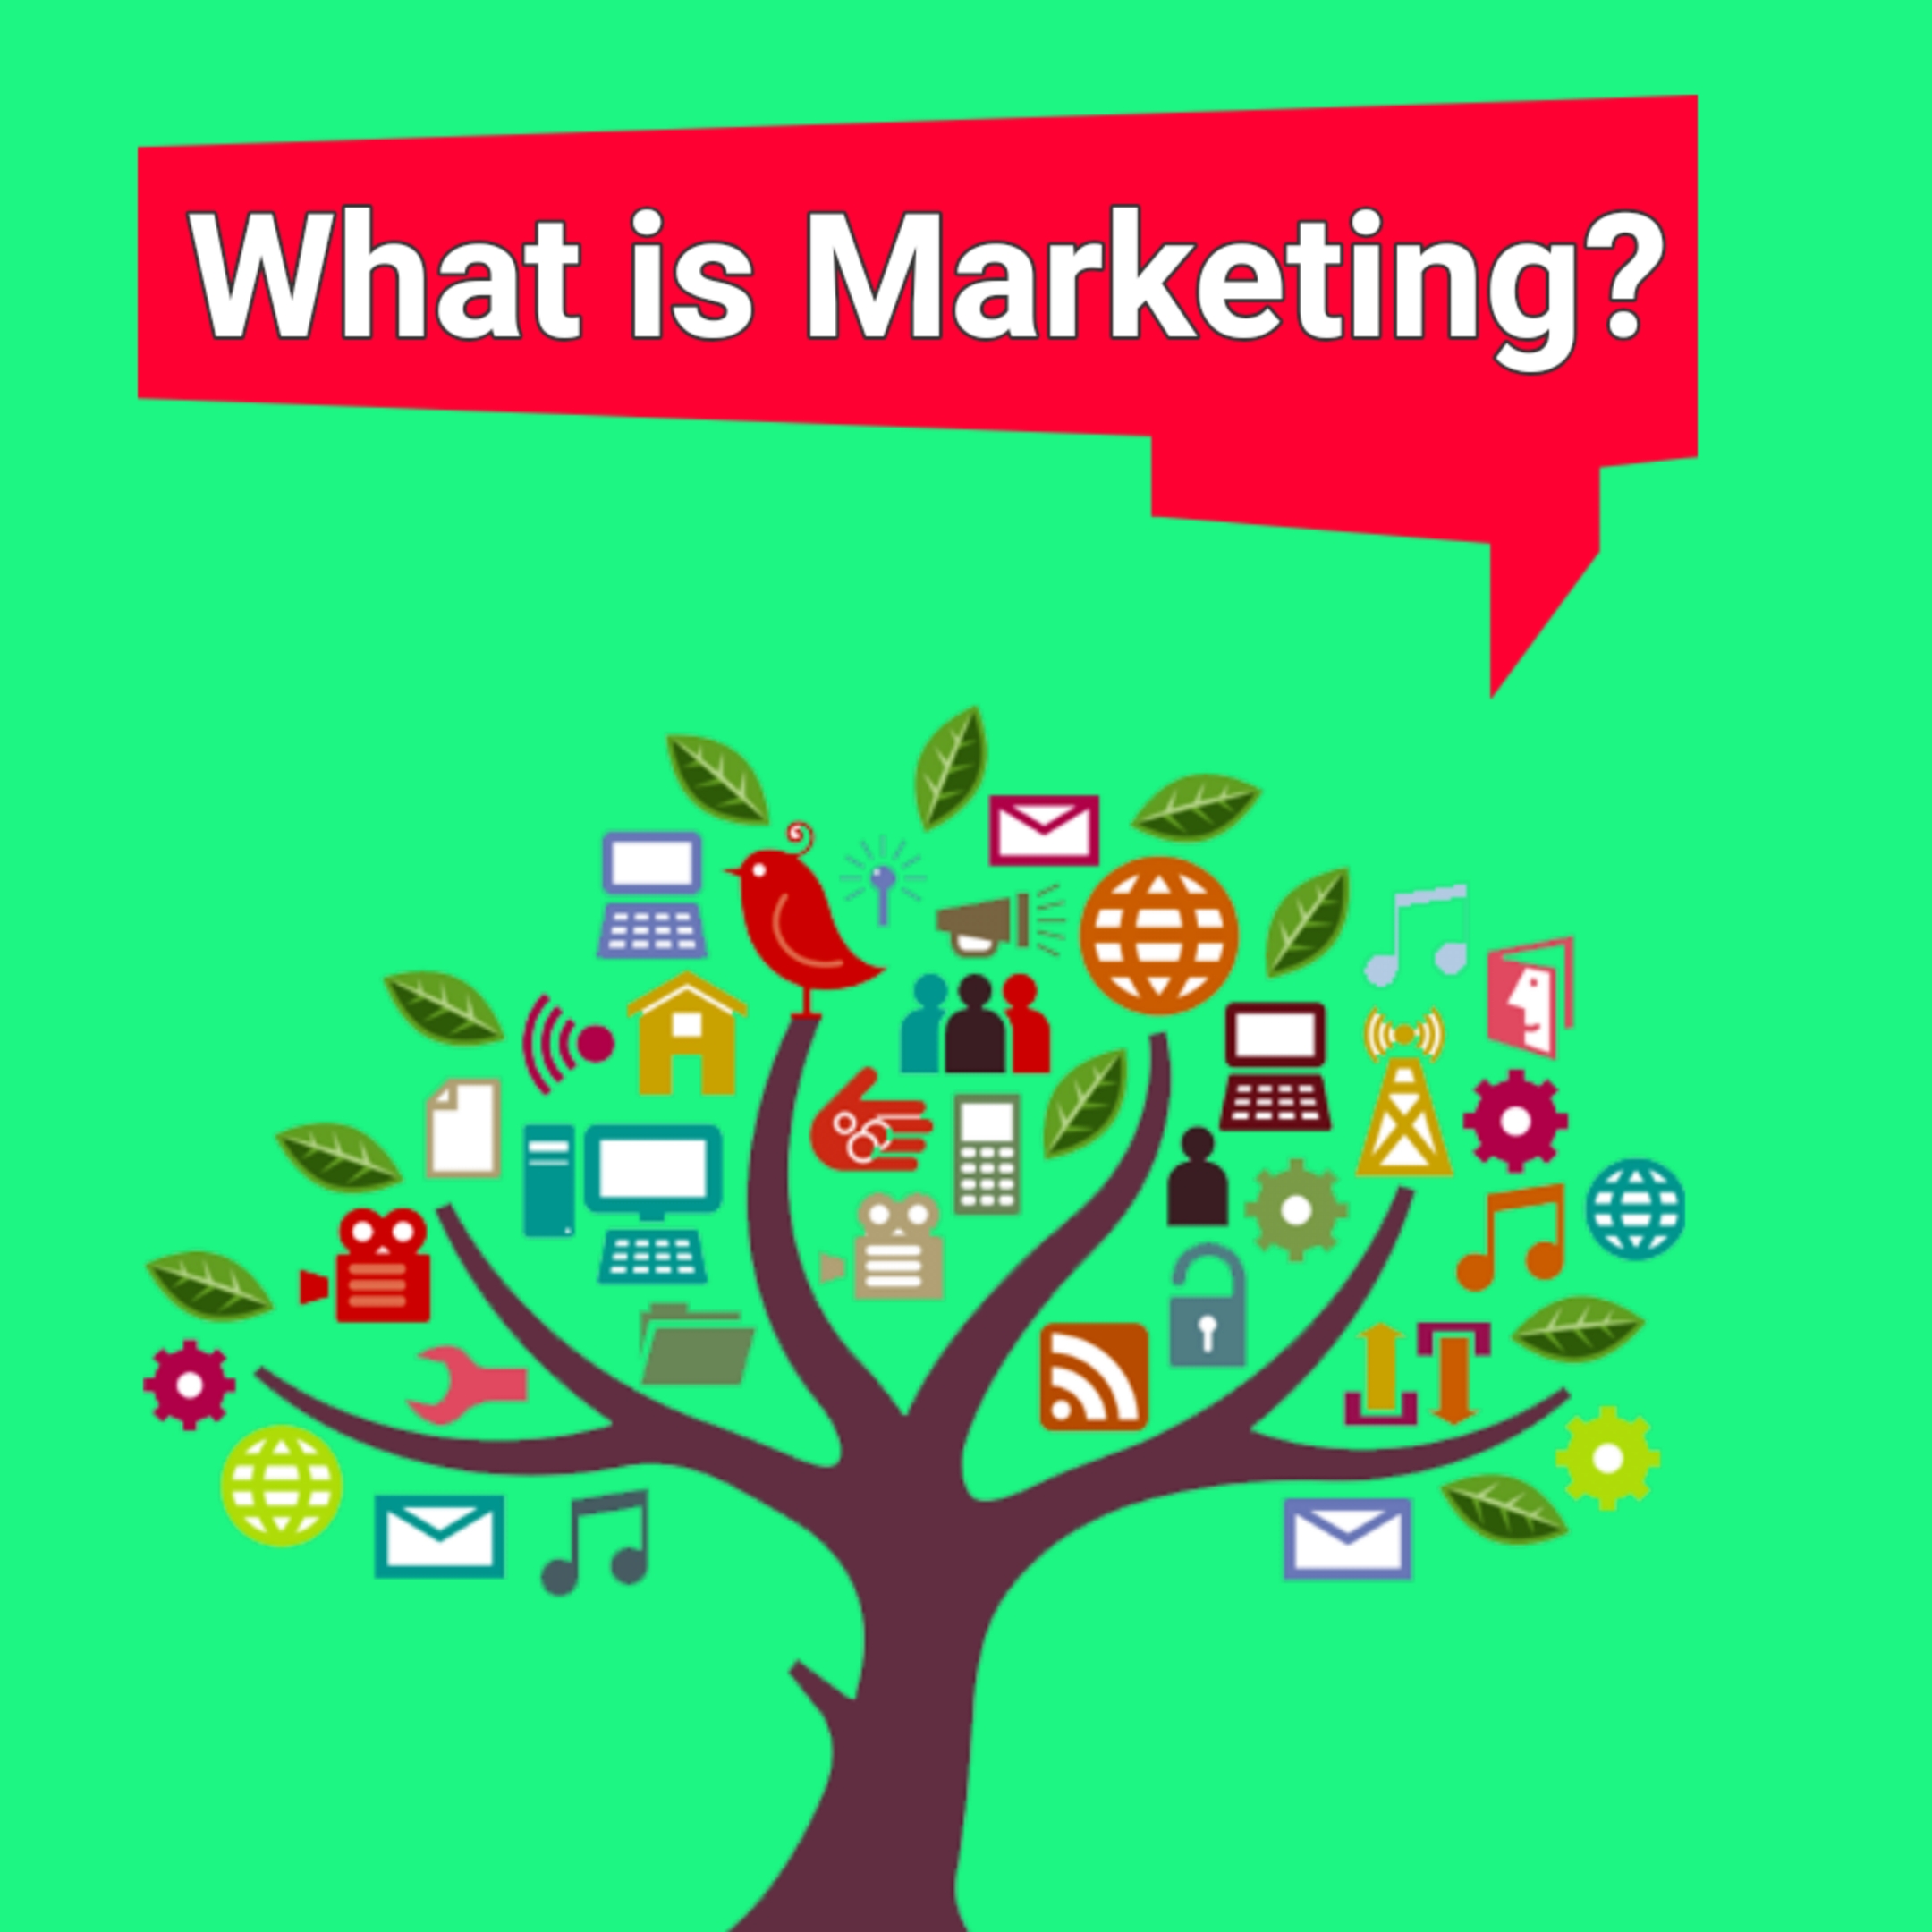 What Is Marketing? All The Marketing Concepts Explained (with Infographic)